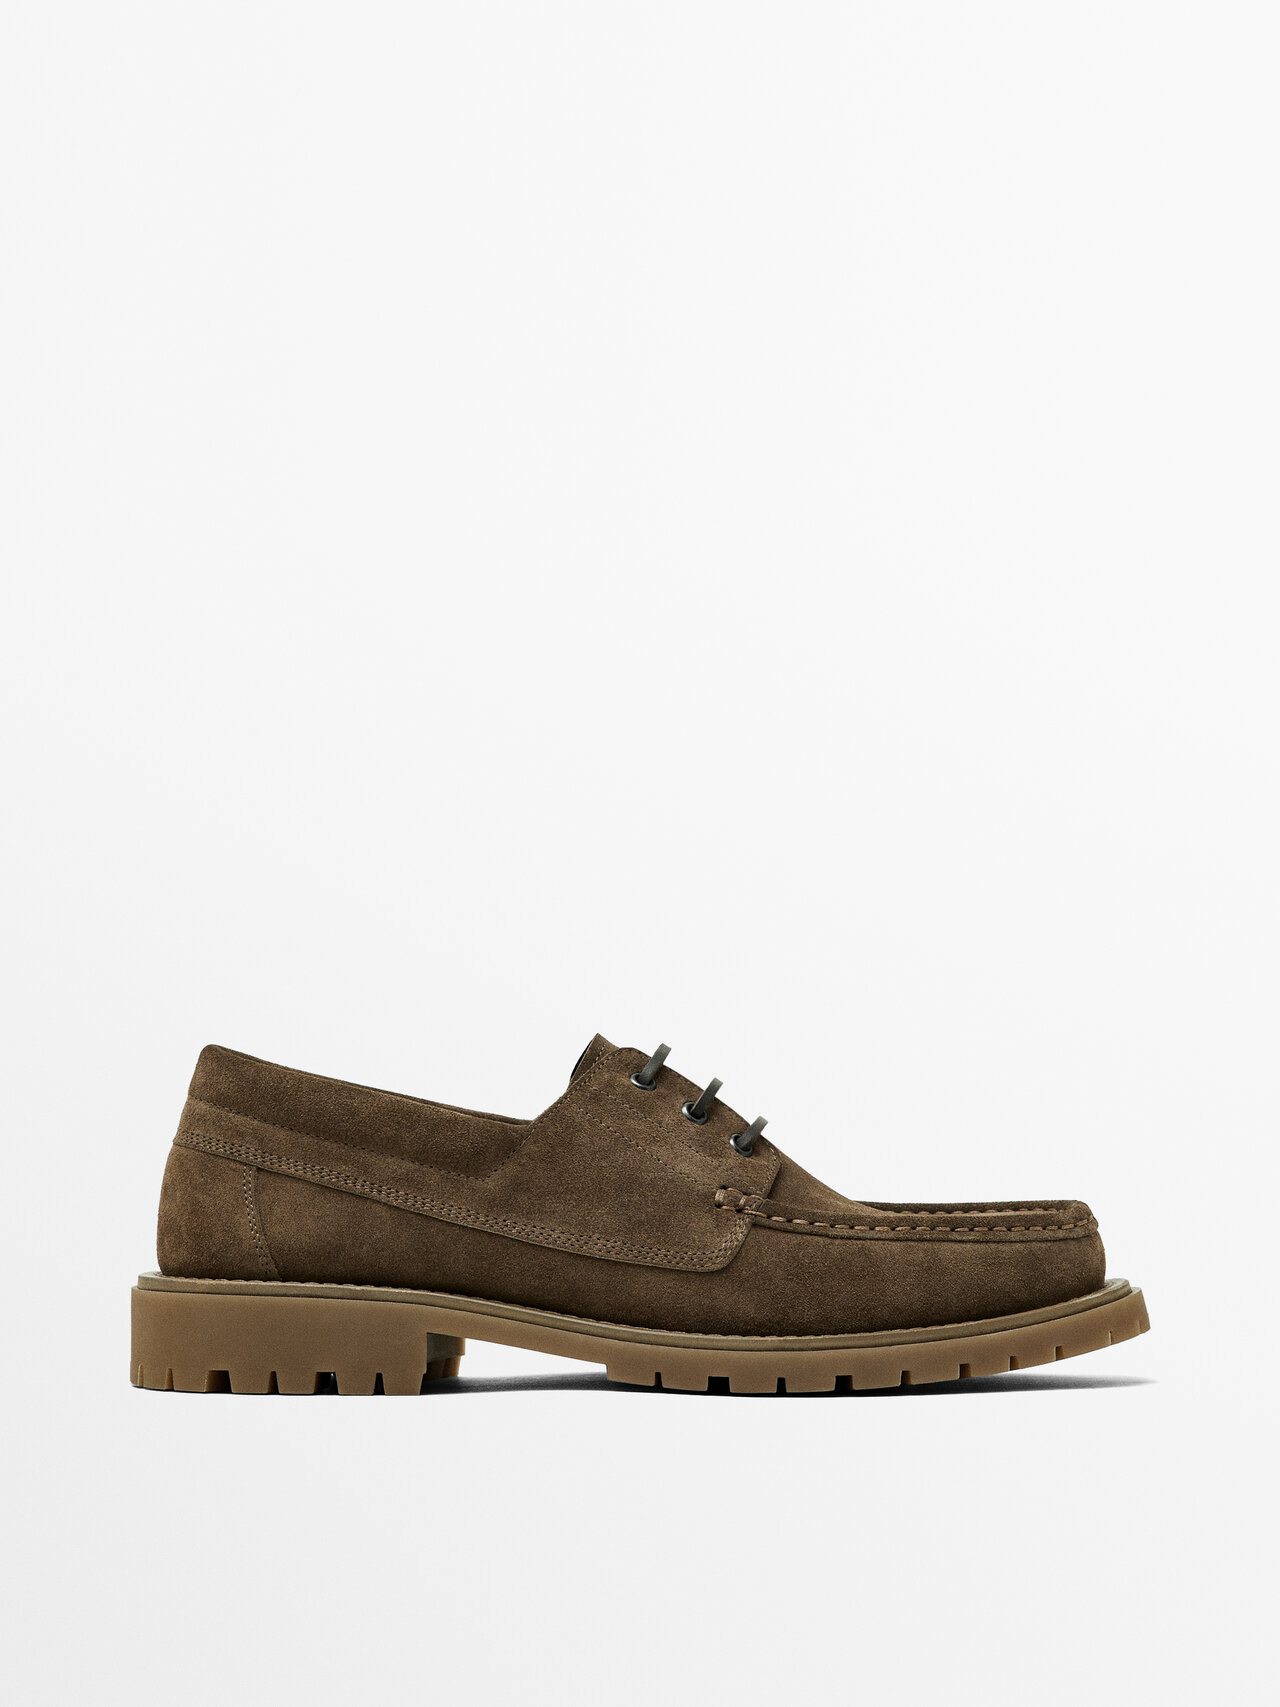 Massimo Dutti Split Suede Deck Shoes In Mink